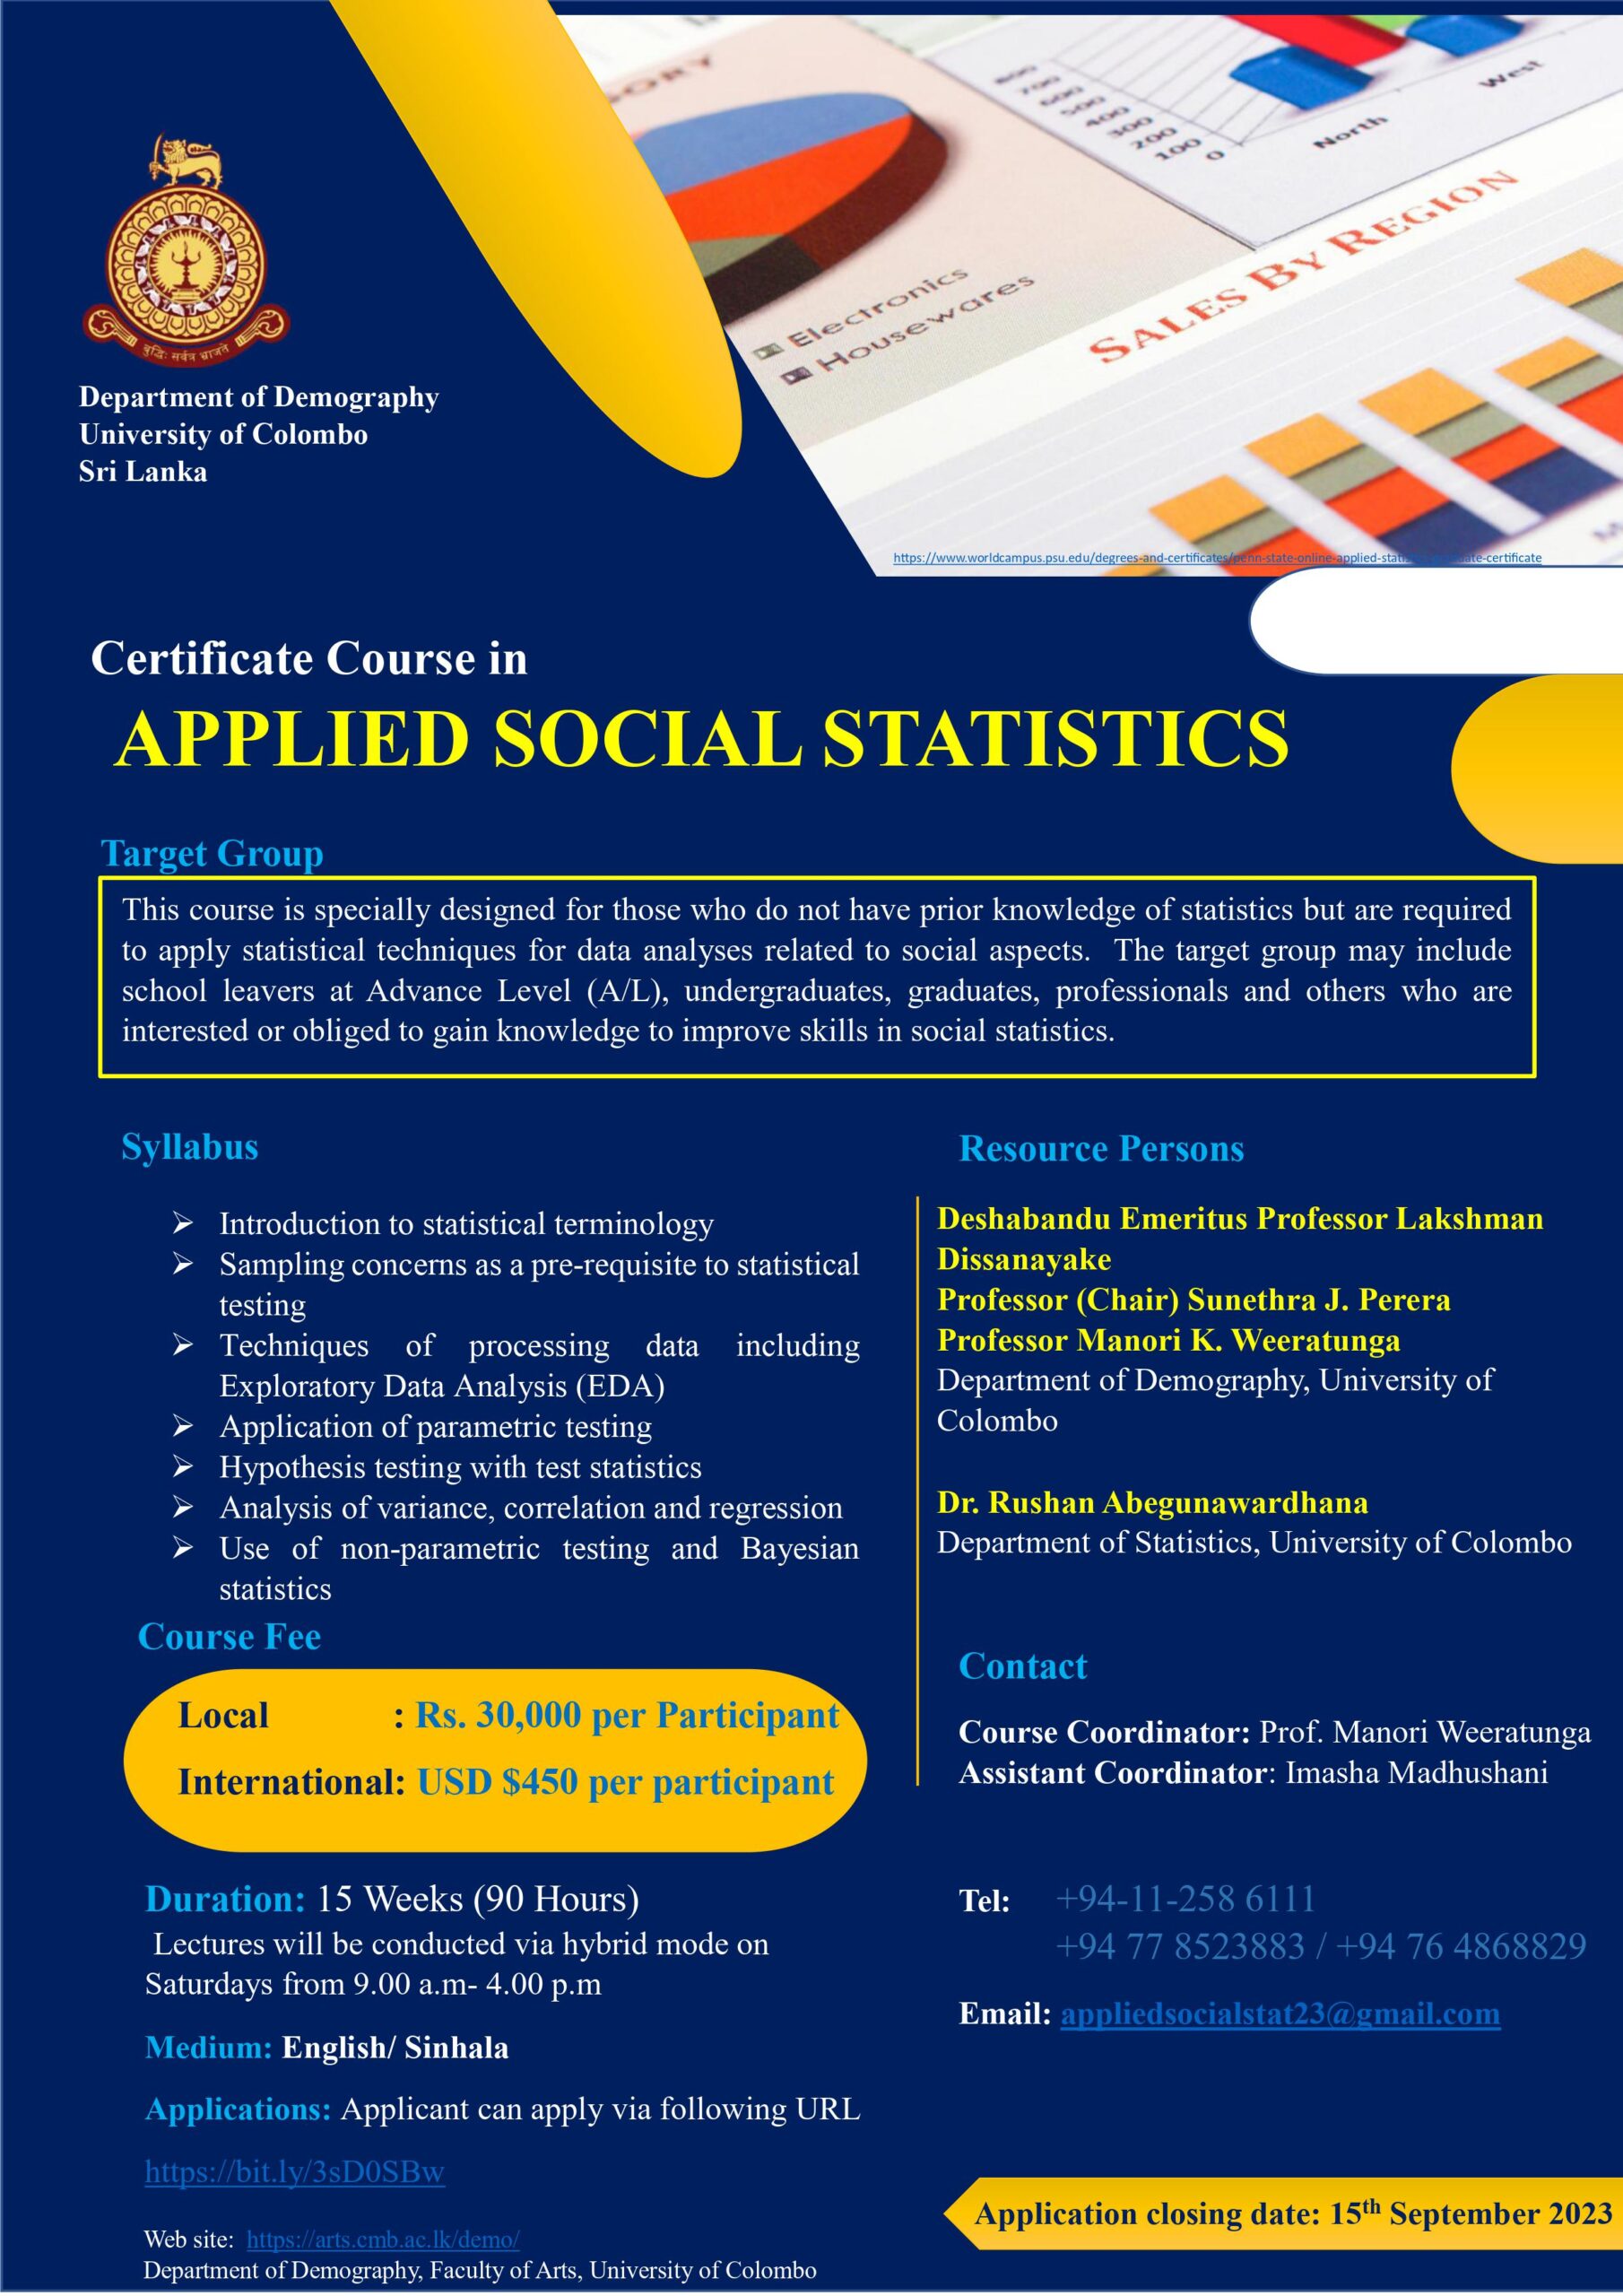 Certificate Course in Applied Social Statistics | Call for Application